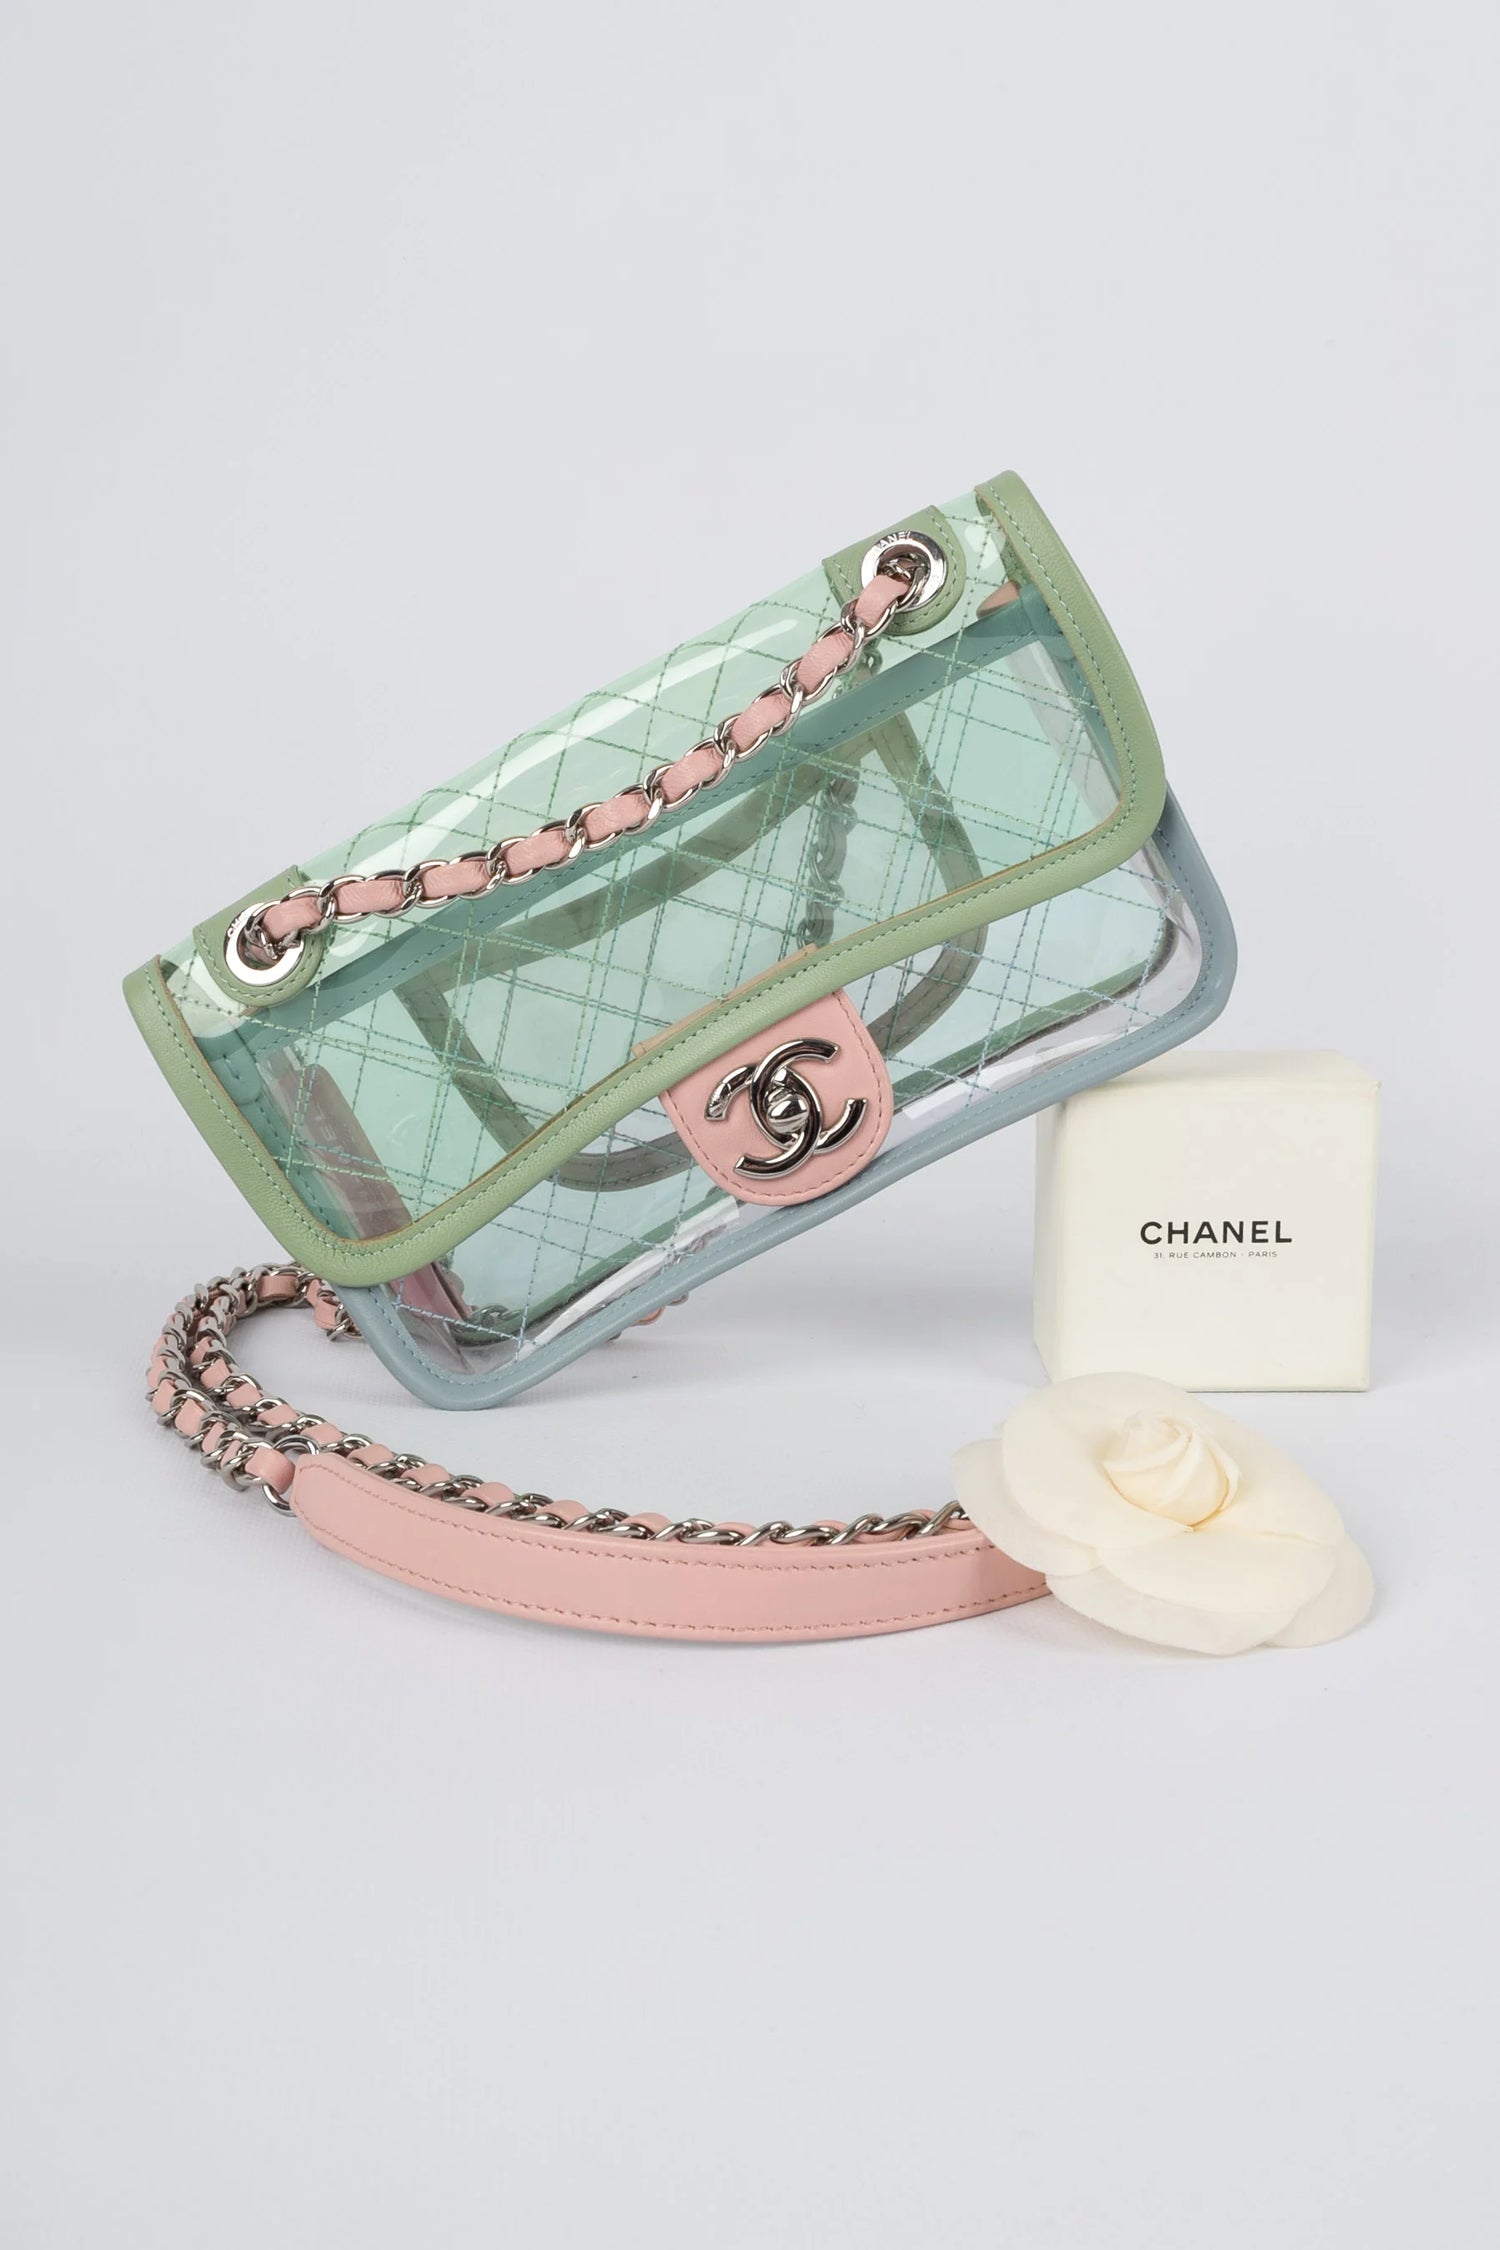 Chanel and YSL accessories